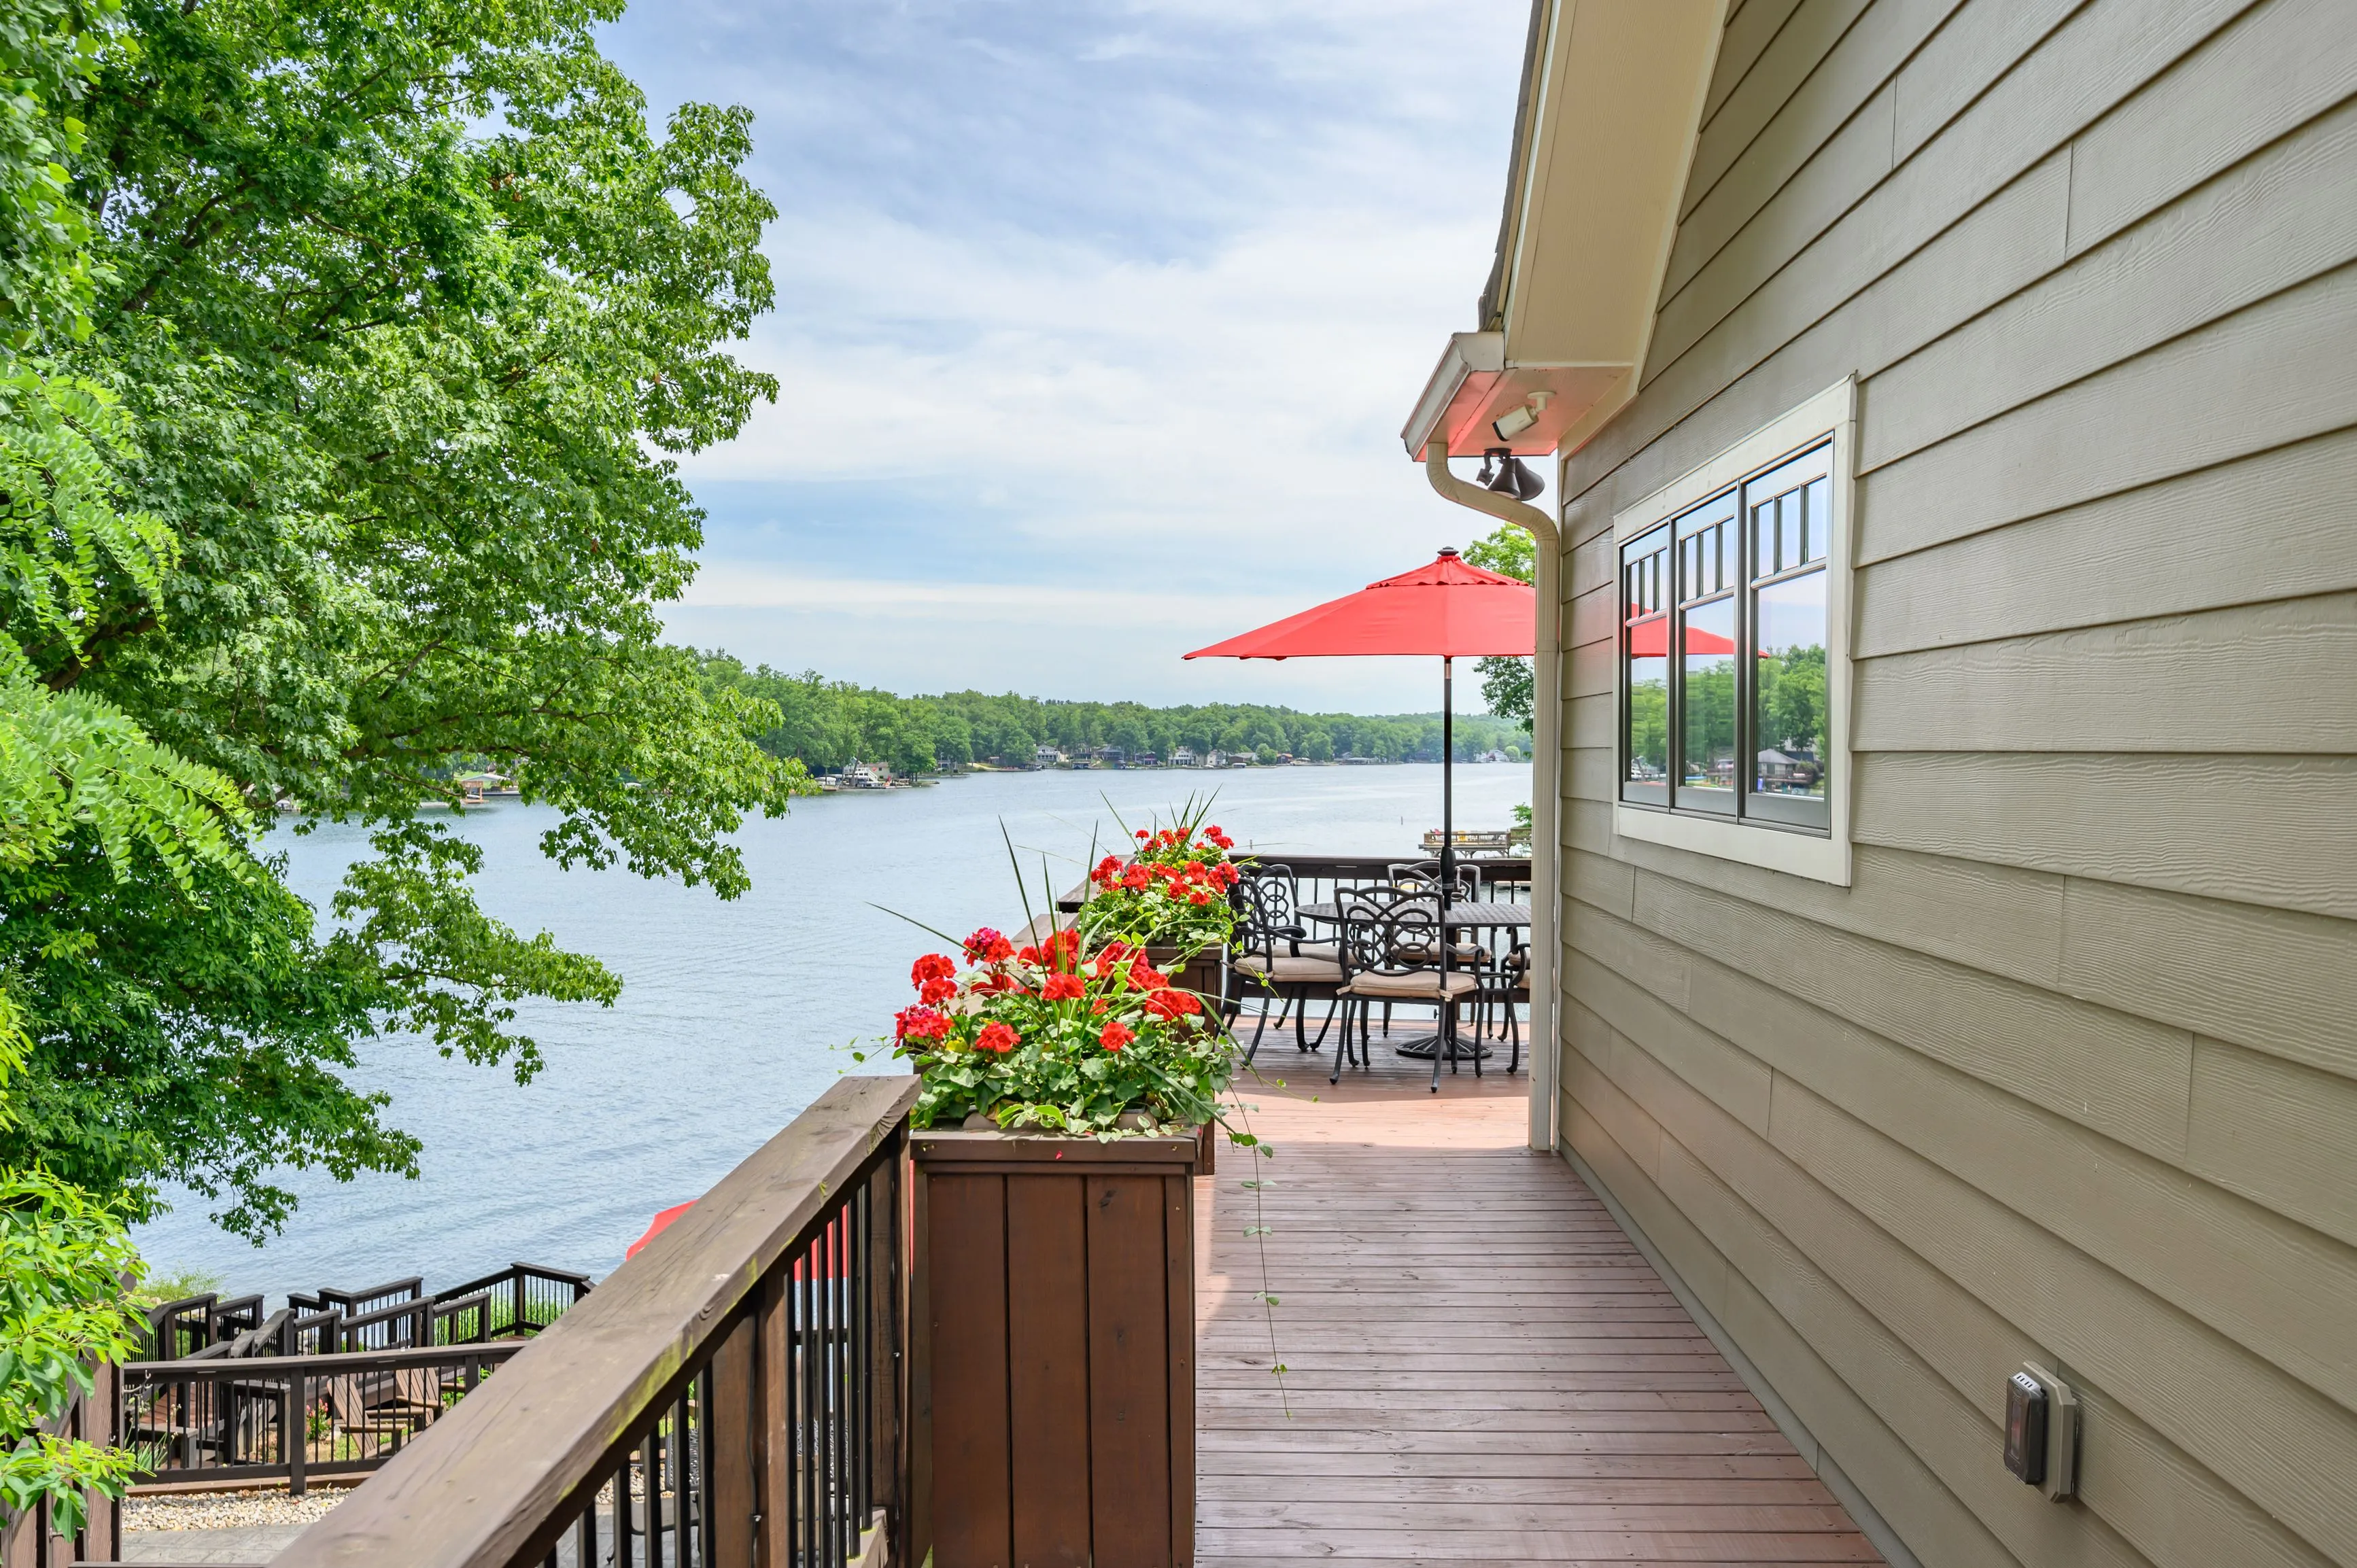 A scenic view from a lakeside home's deck featuring a dining area under a red umbrella, surrounded by lush greenery, overlooking a tranquil lake.